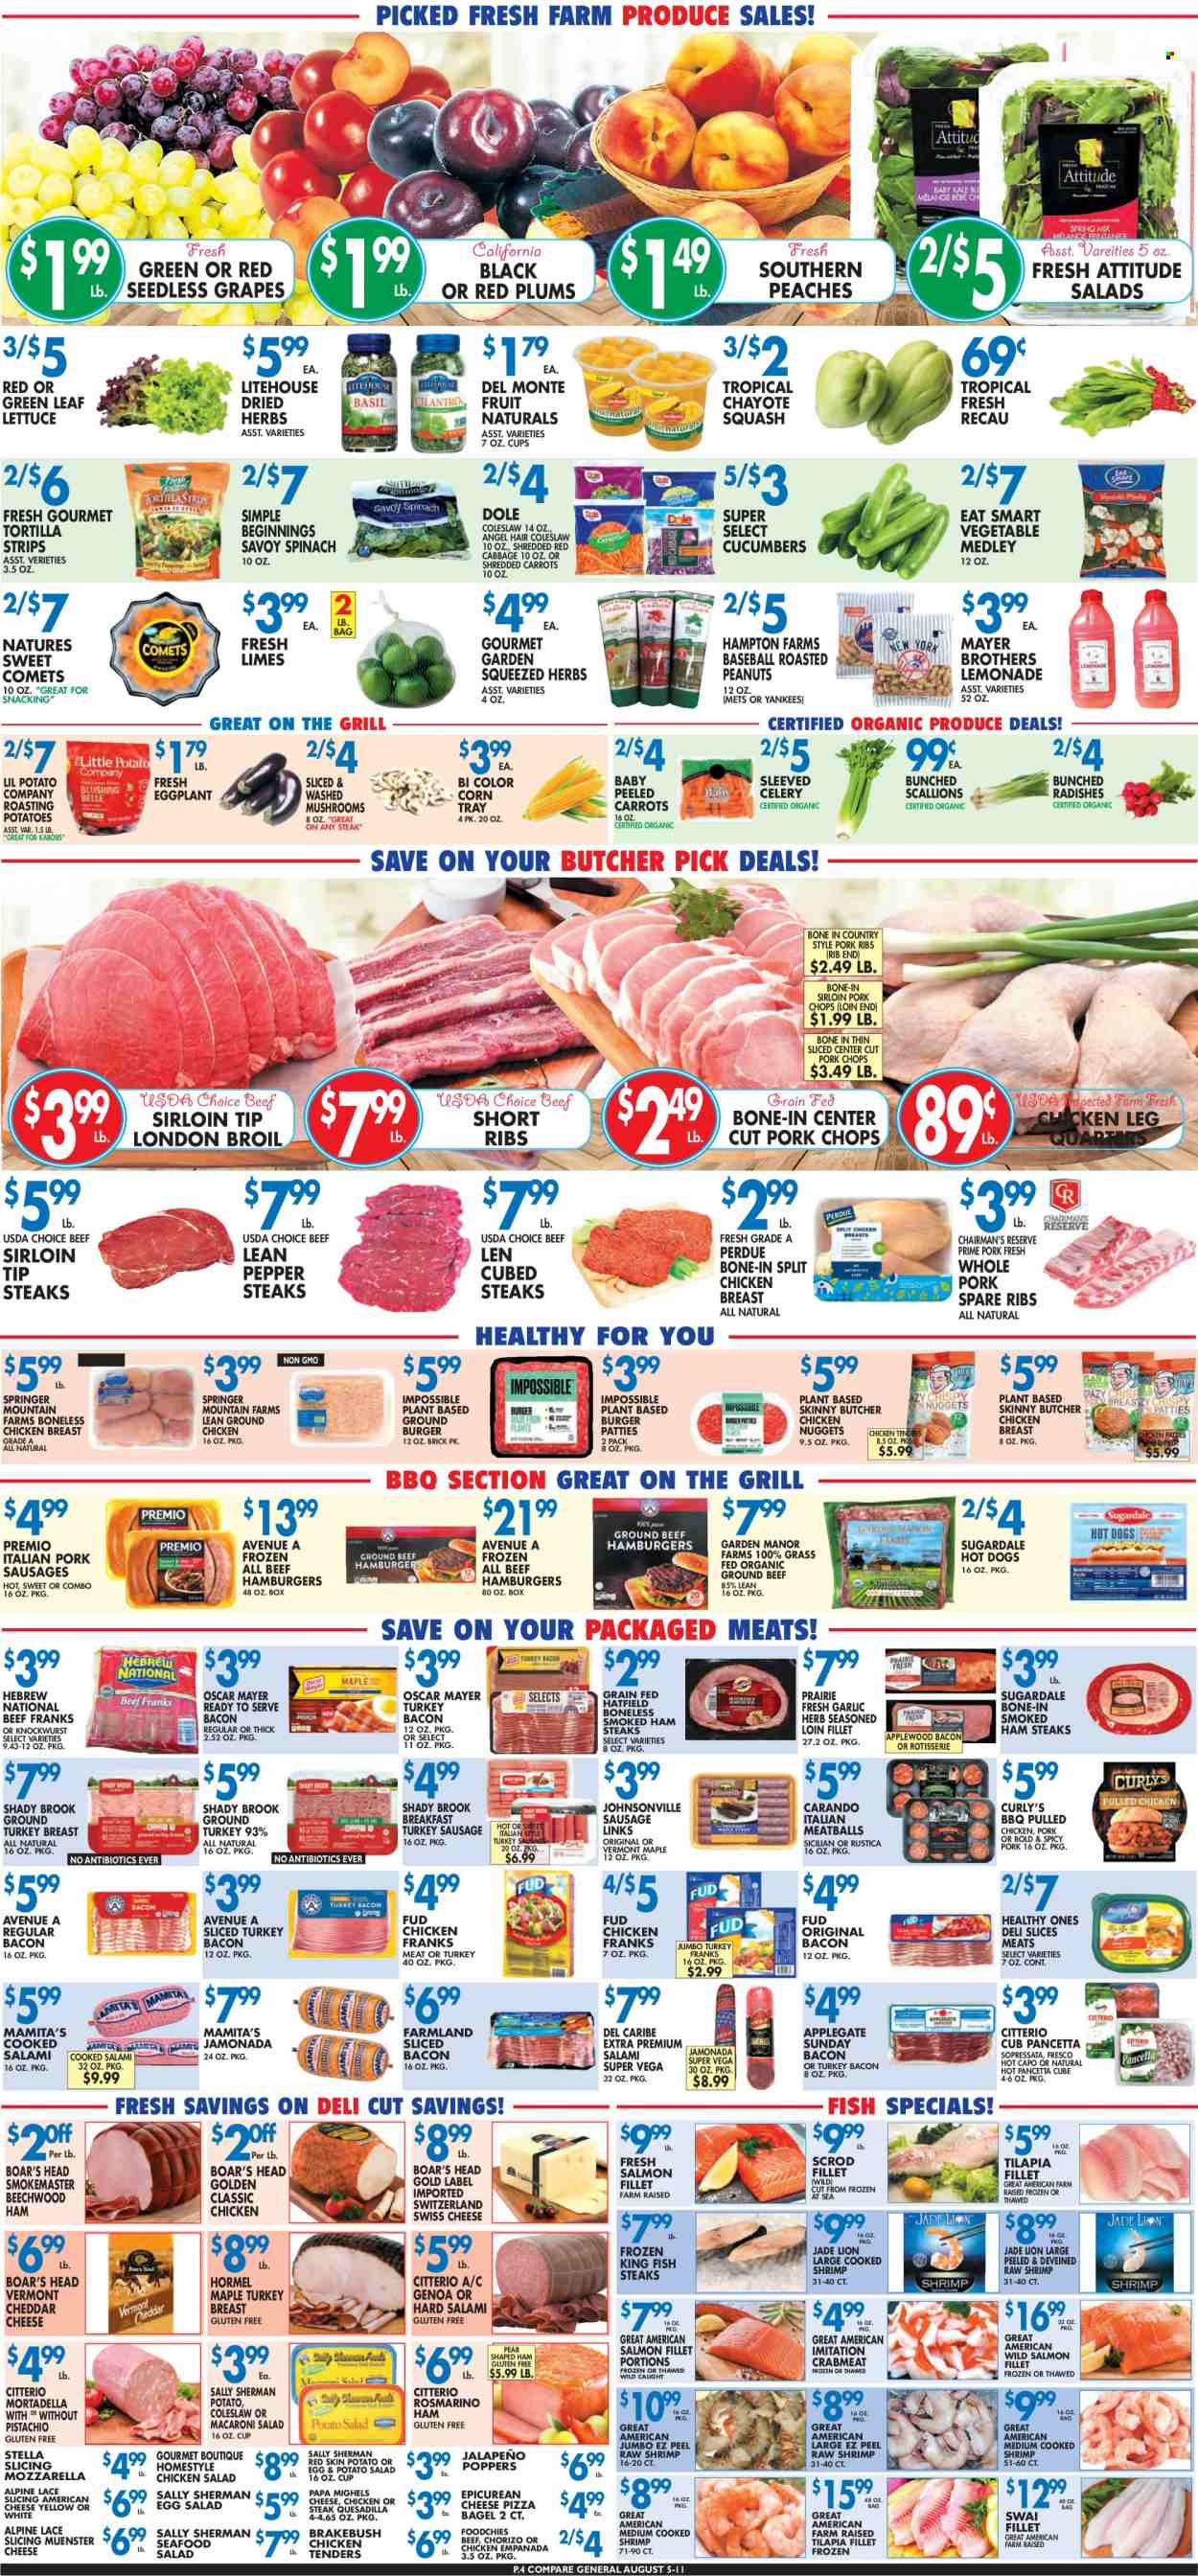 Compare Foods ad  - 08.05.2022 - 08.11.2022.